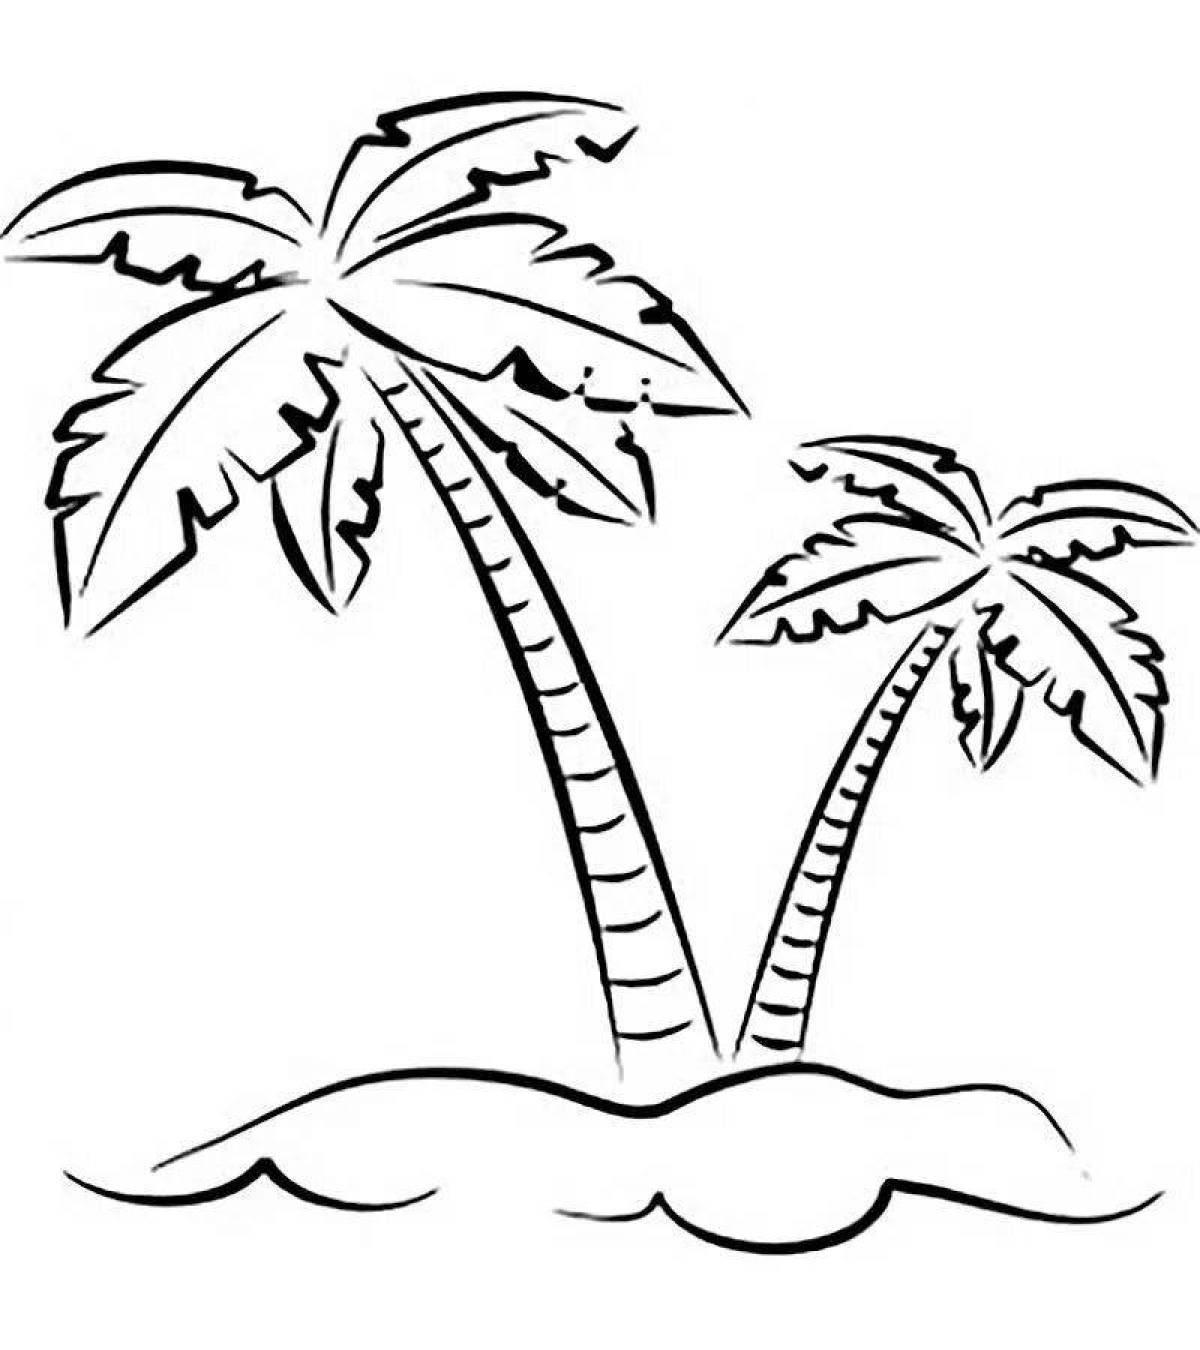 Incredible palm tree coloring book for kids